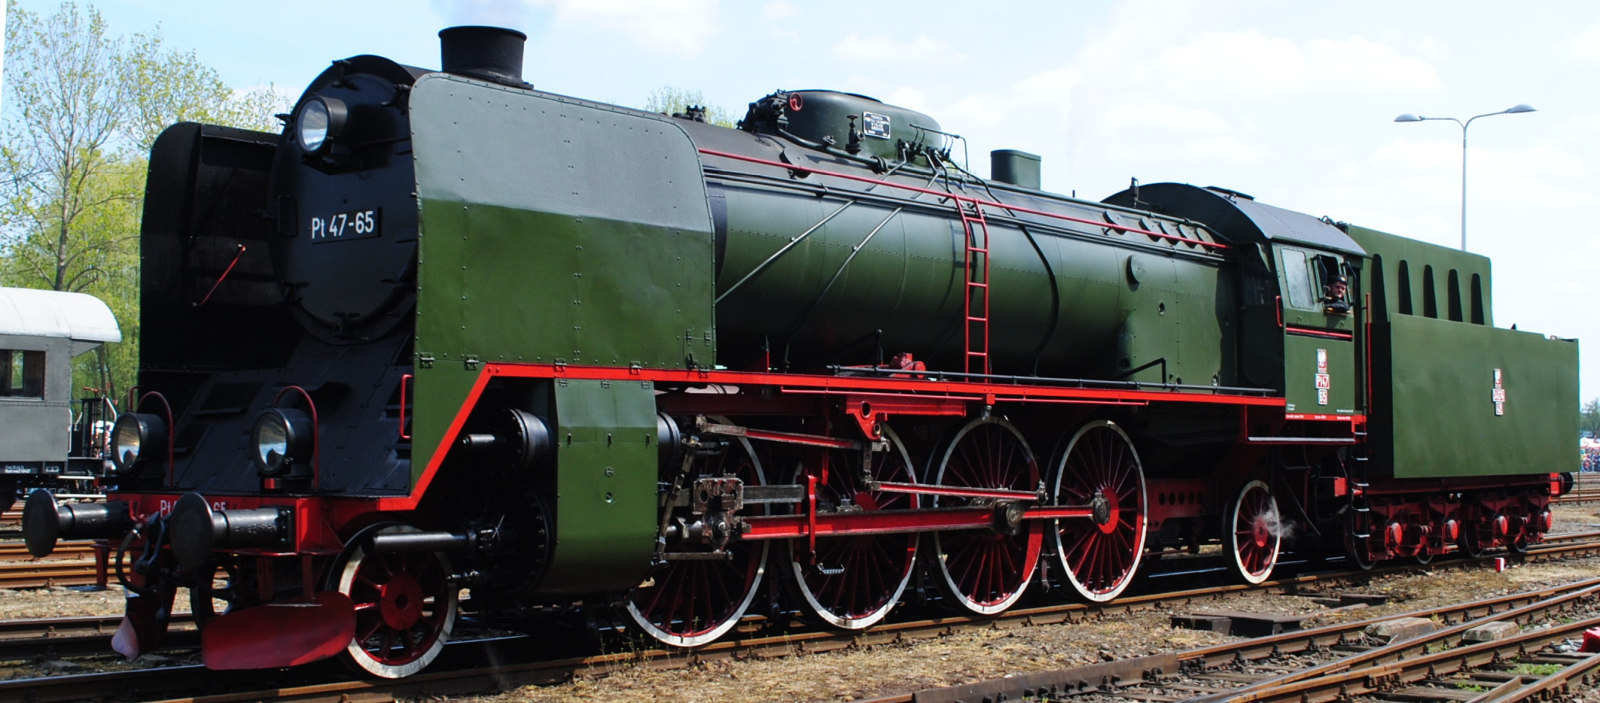 Pt47-65 at a locomotive parade in Wolsztyn in April 2016